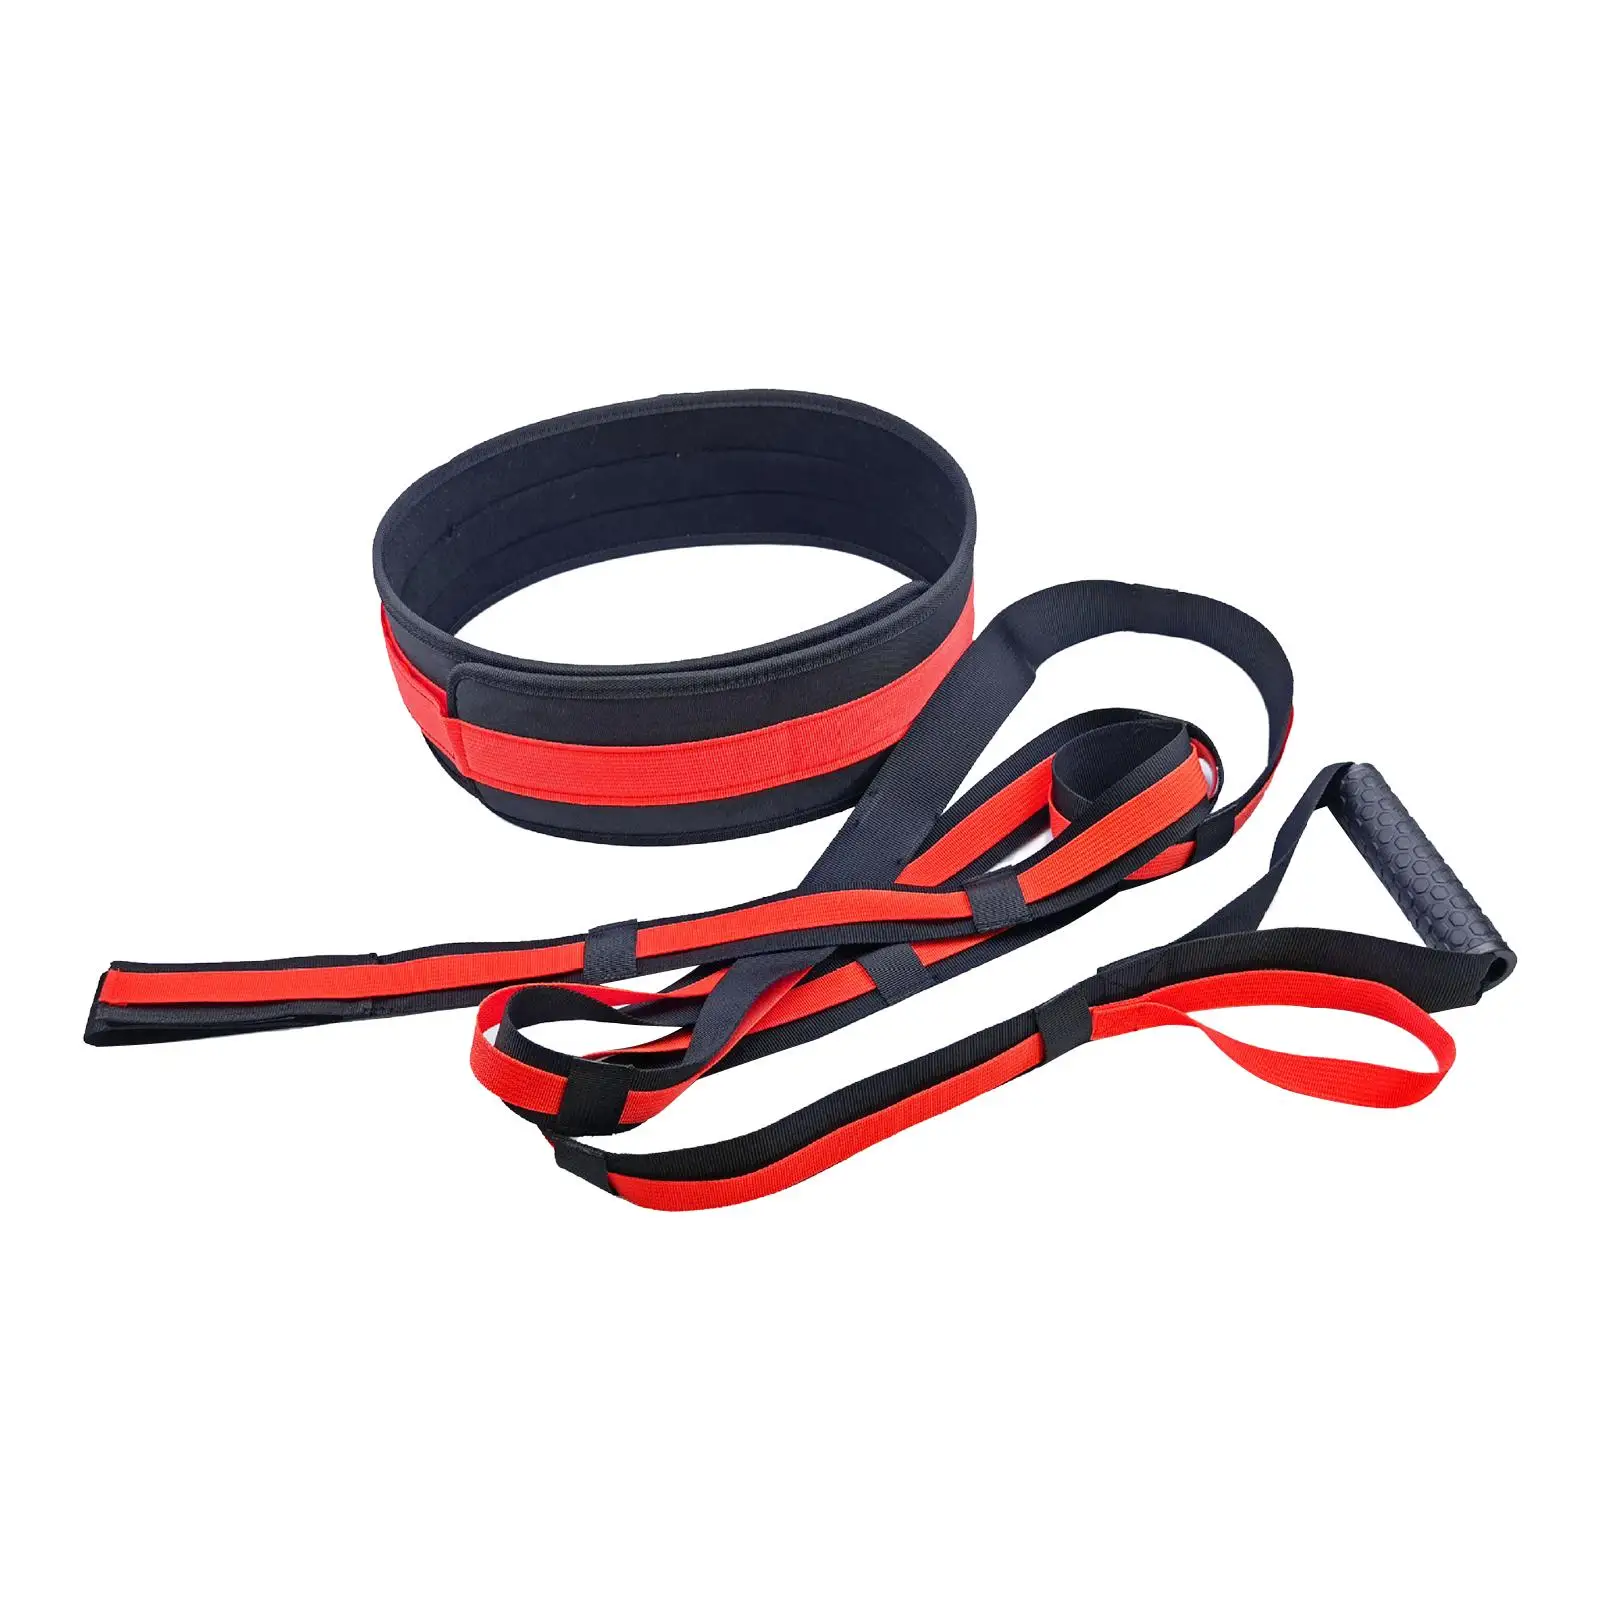 Resistance Running Bungee Band Speed Training Kit for Training Gym Workout